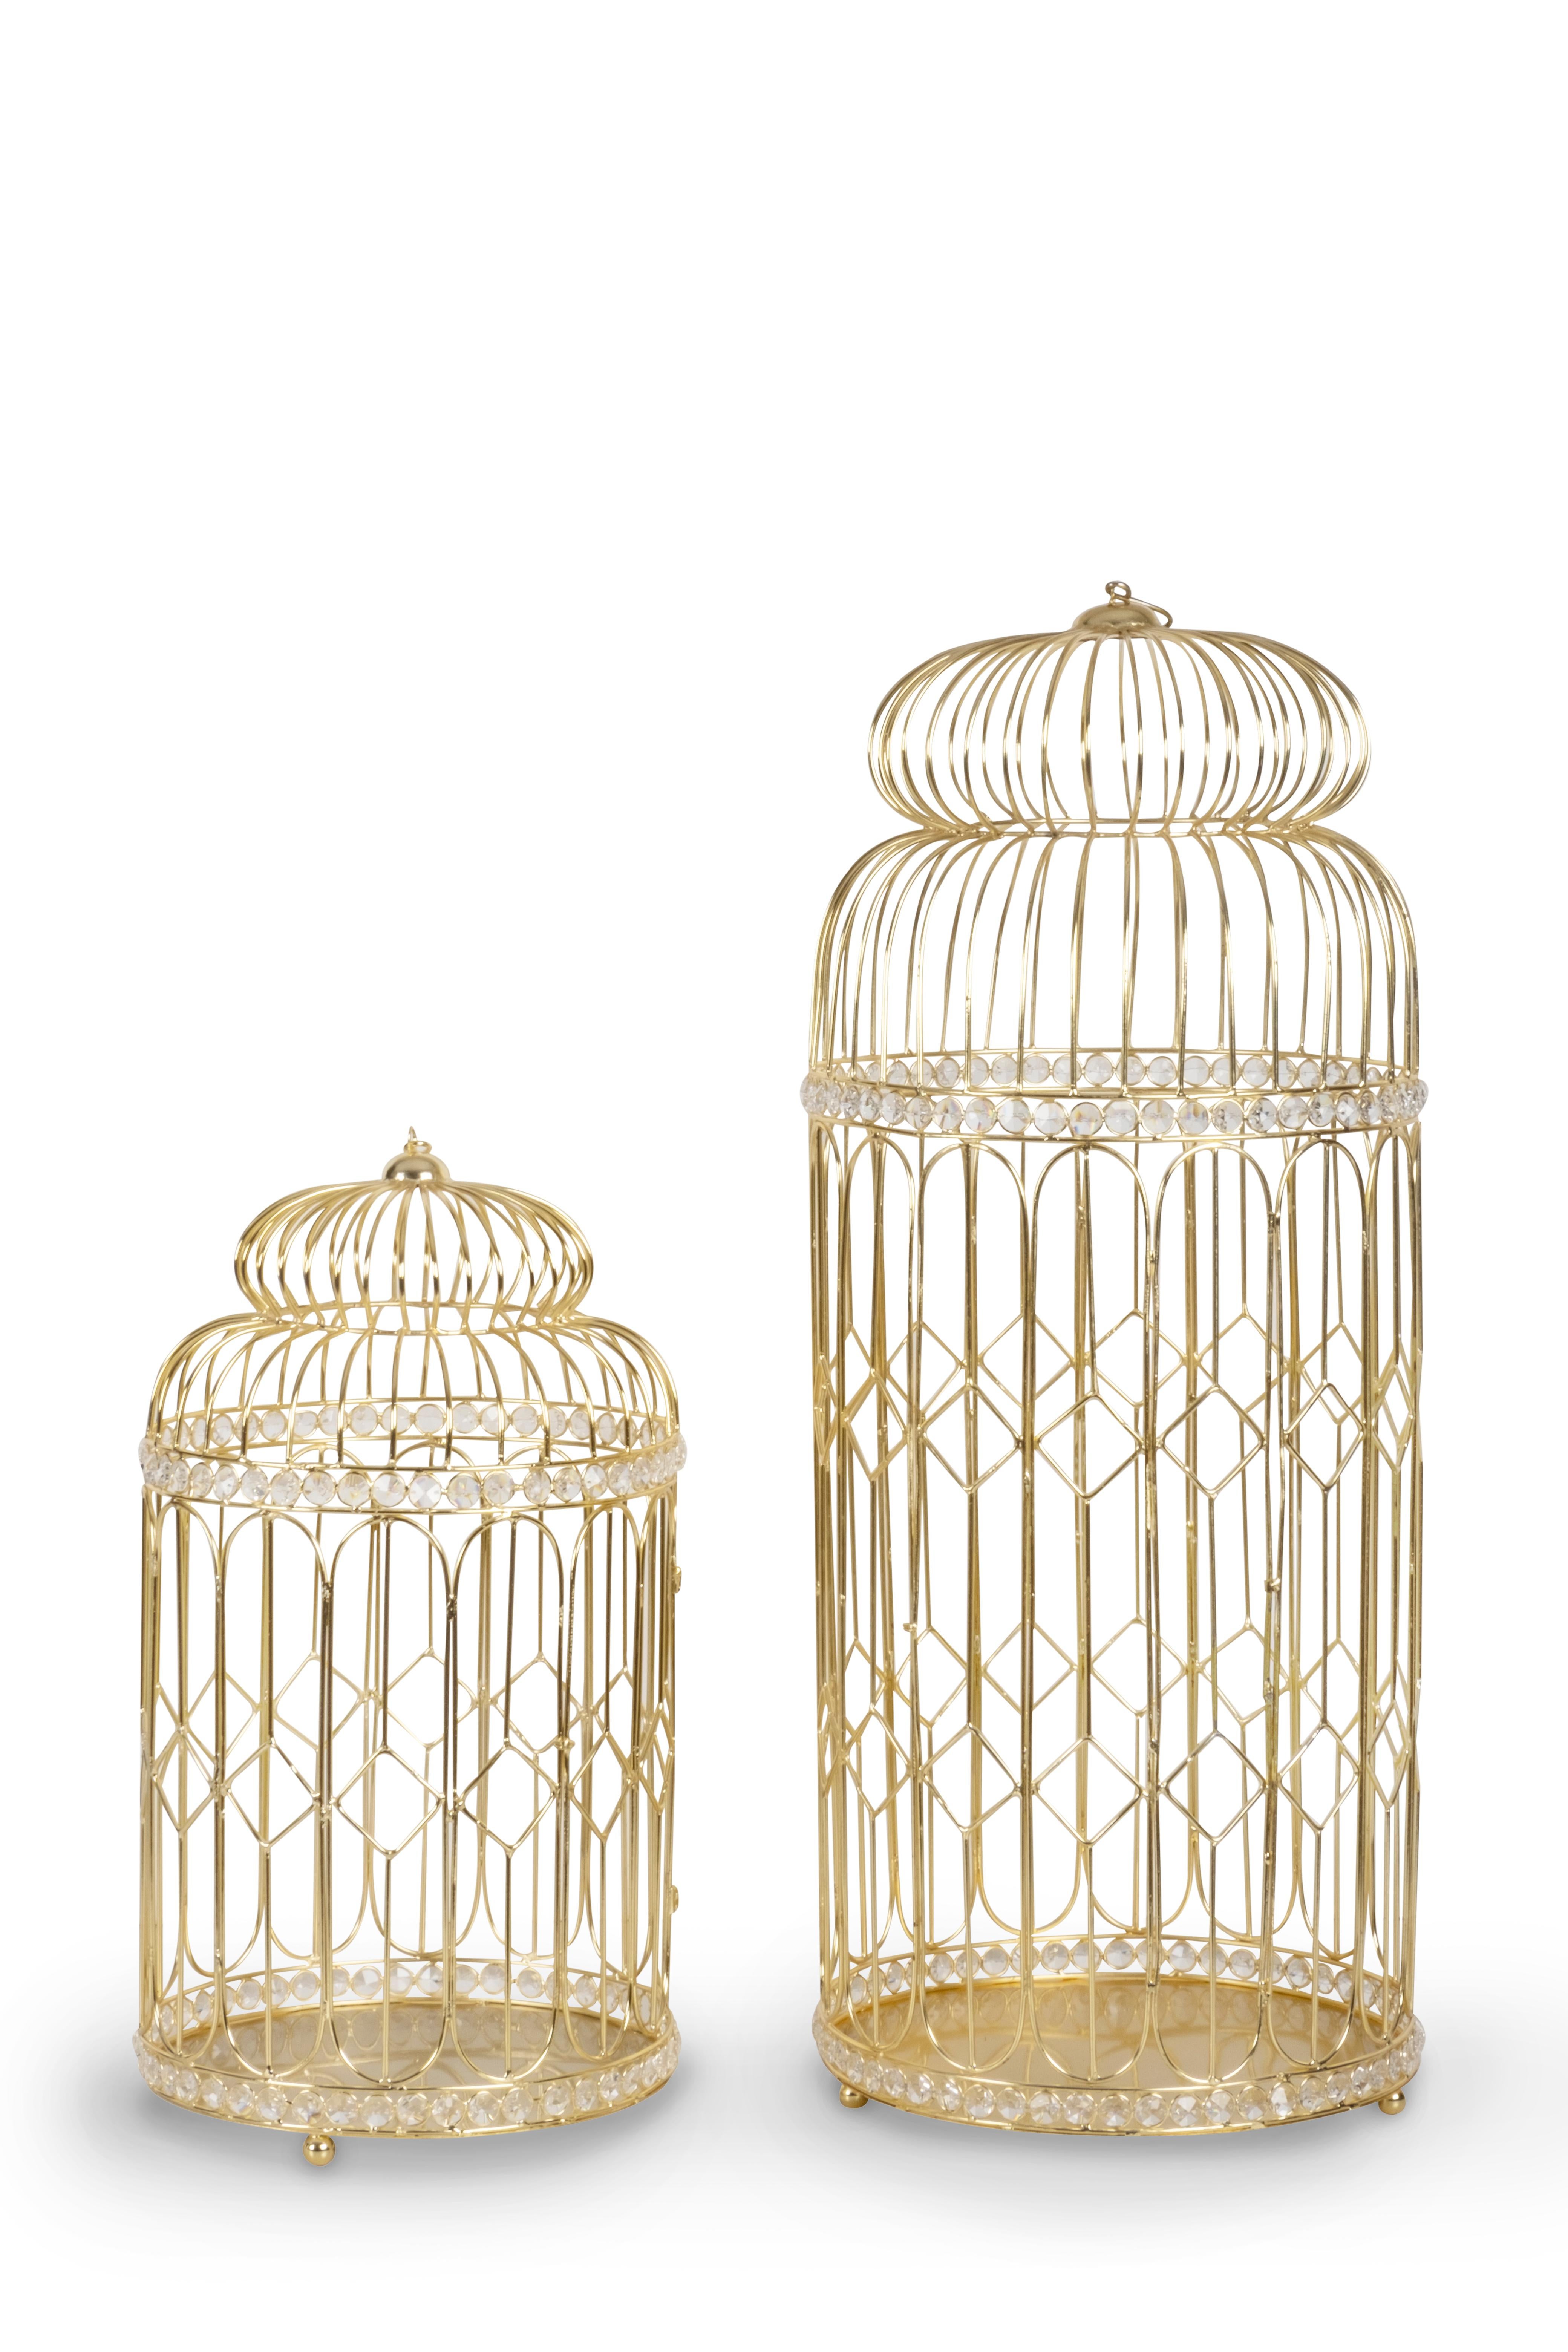 Set/2 Birdcages, Golden Plating & Crystals, Handmade by Lusitanus Home For Sale 1